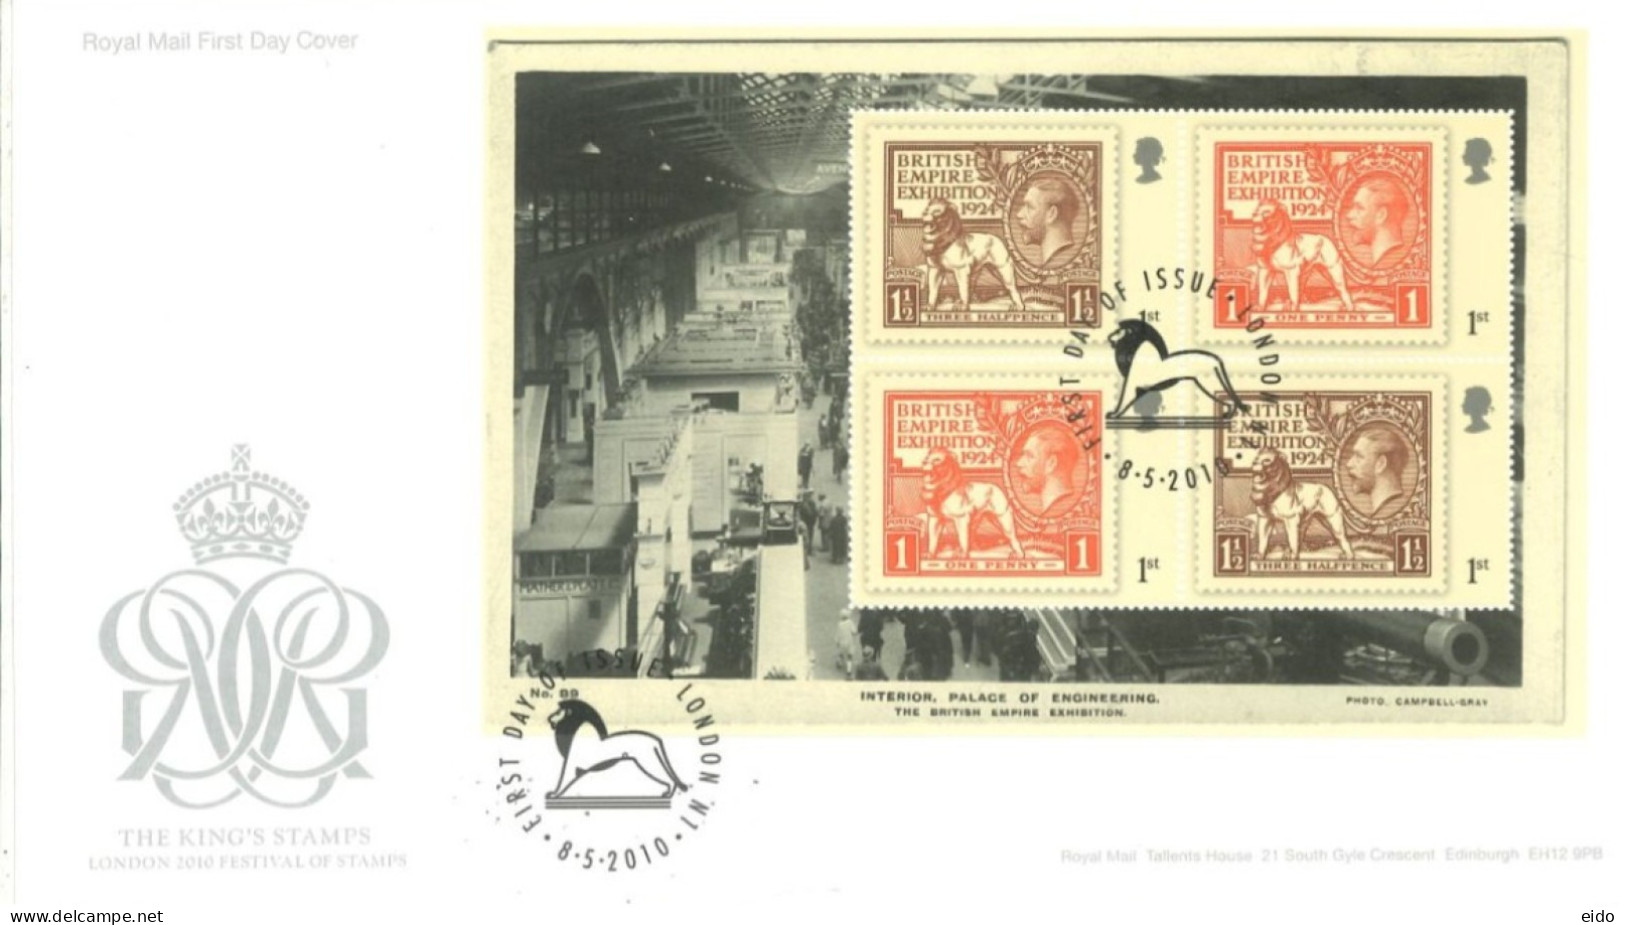 GREAT BRITAIN - 2010, FDC OF MINIATURE SHEET OF THE KING'S STAMPS, LONDON 2010 FESTIVAL OF STAMPS. - Cartas & Documentos